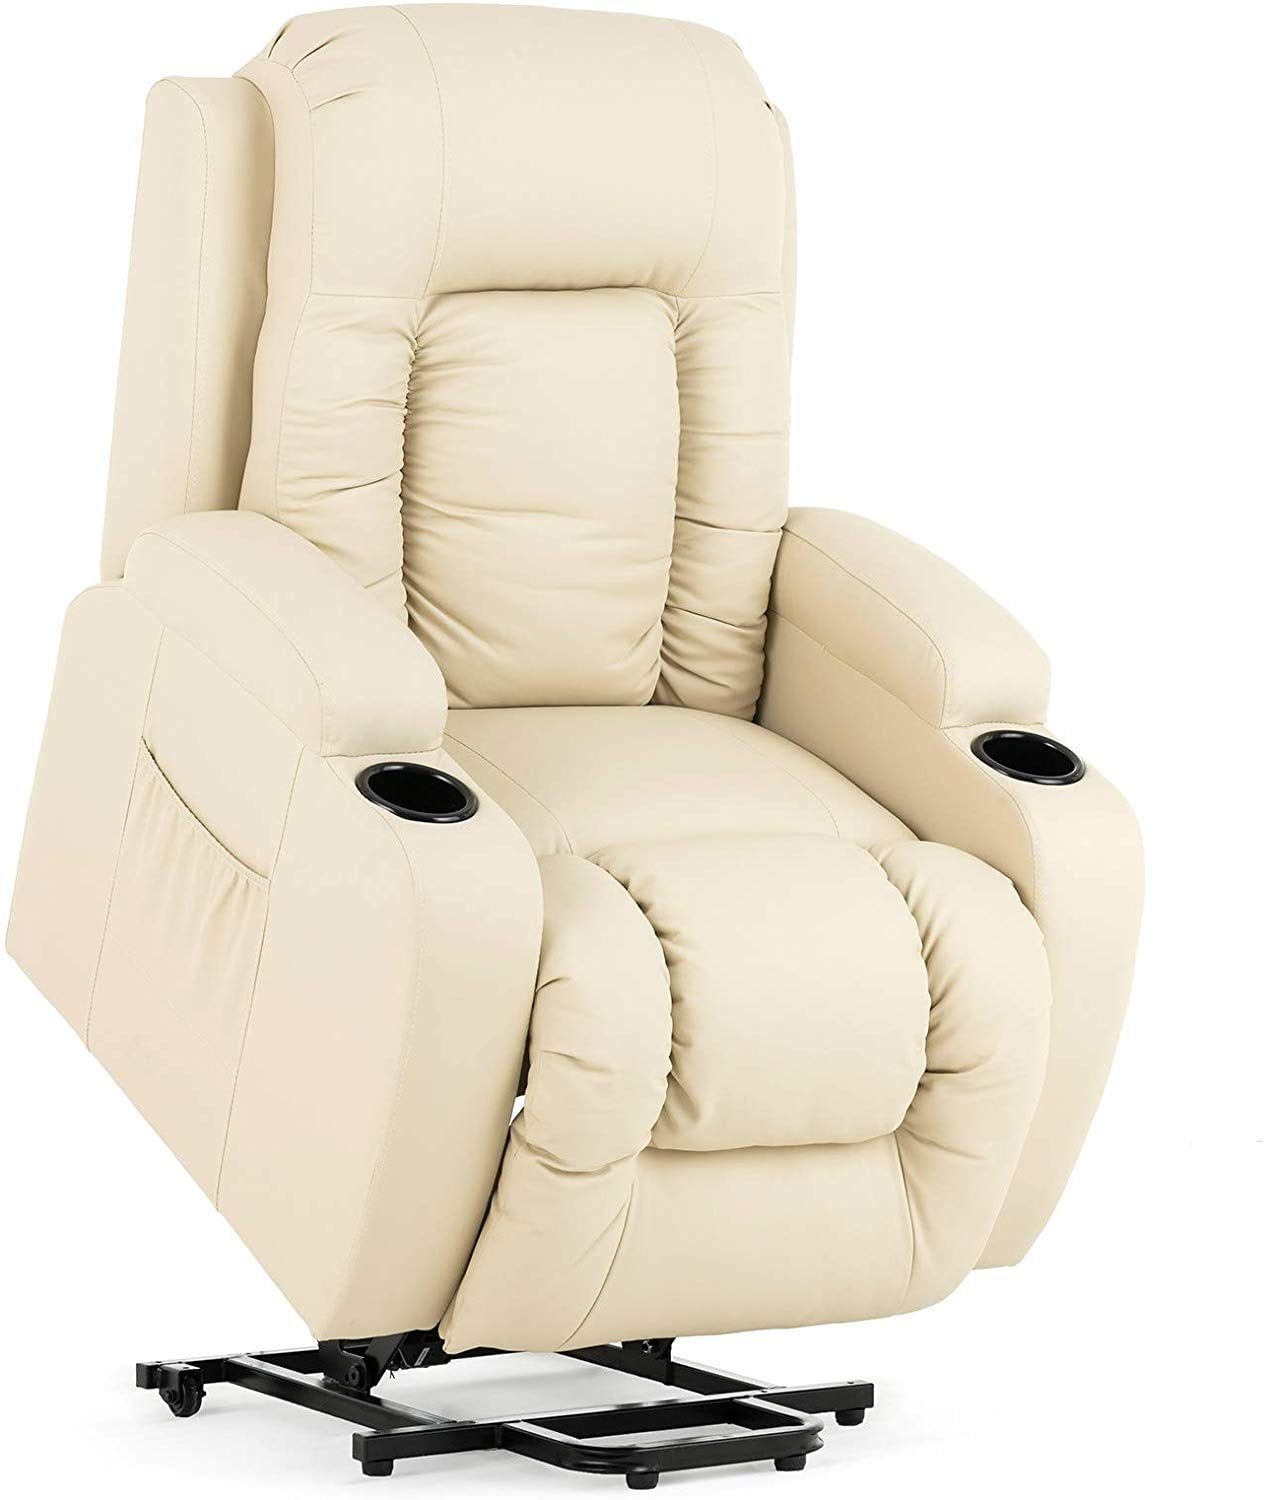 Mecor Power Lift Recliners Chairs, Leather Lift Recliner